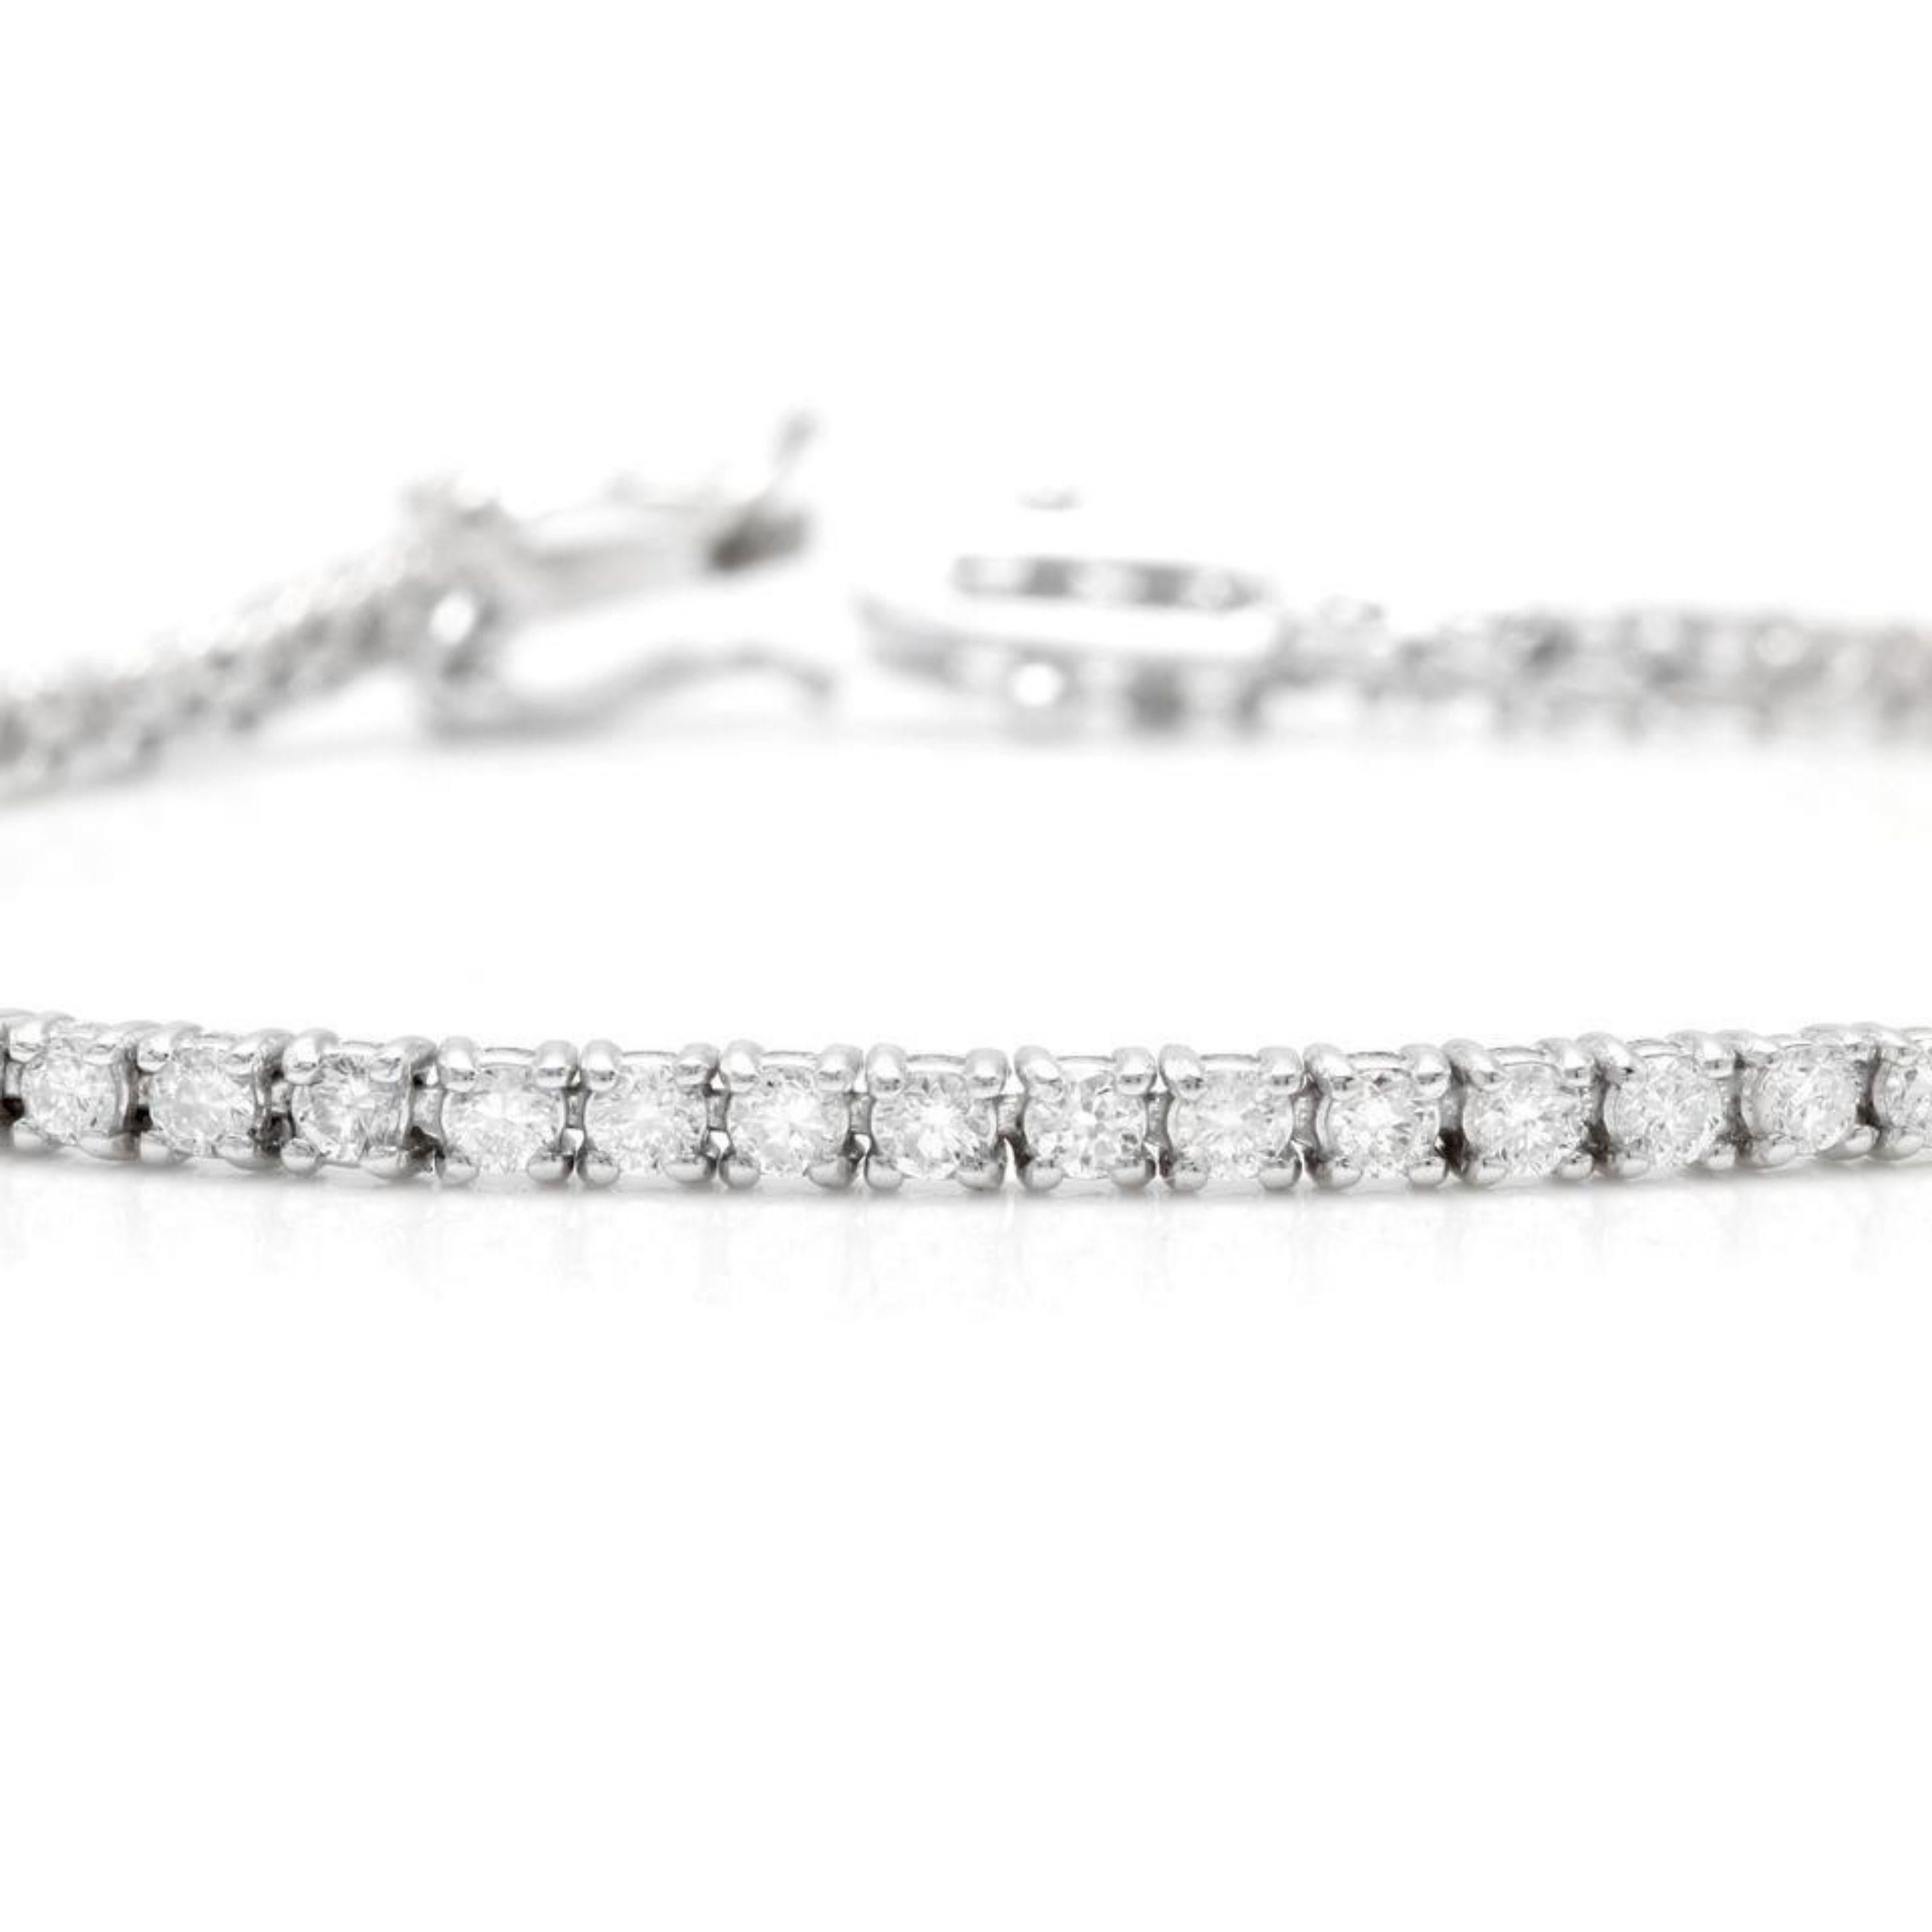 Very Impressive 3.00 Carats Natural Diamond 14K Solid White Gold Bracelet

STAMPED: 14K

Total Natural Round Diamonds Weight: Approx. 3.00 Carats (color H / Clarity SI1-SI2)

Bracelet Length is: 7 inches

Width: 2.4mm

Bracelet total weight: Approx.